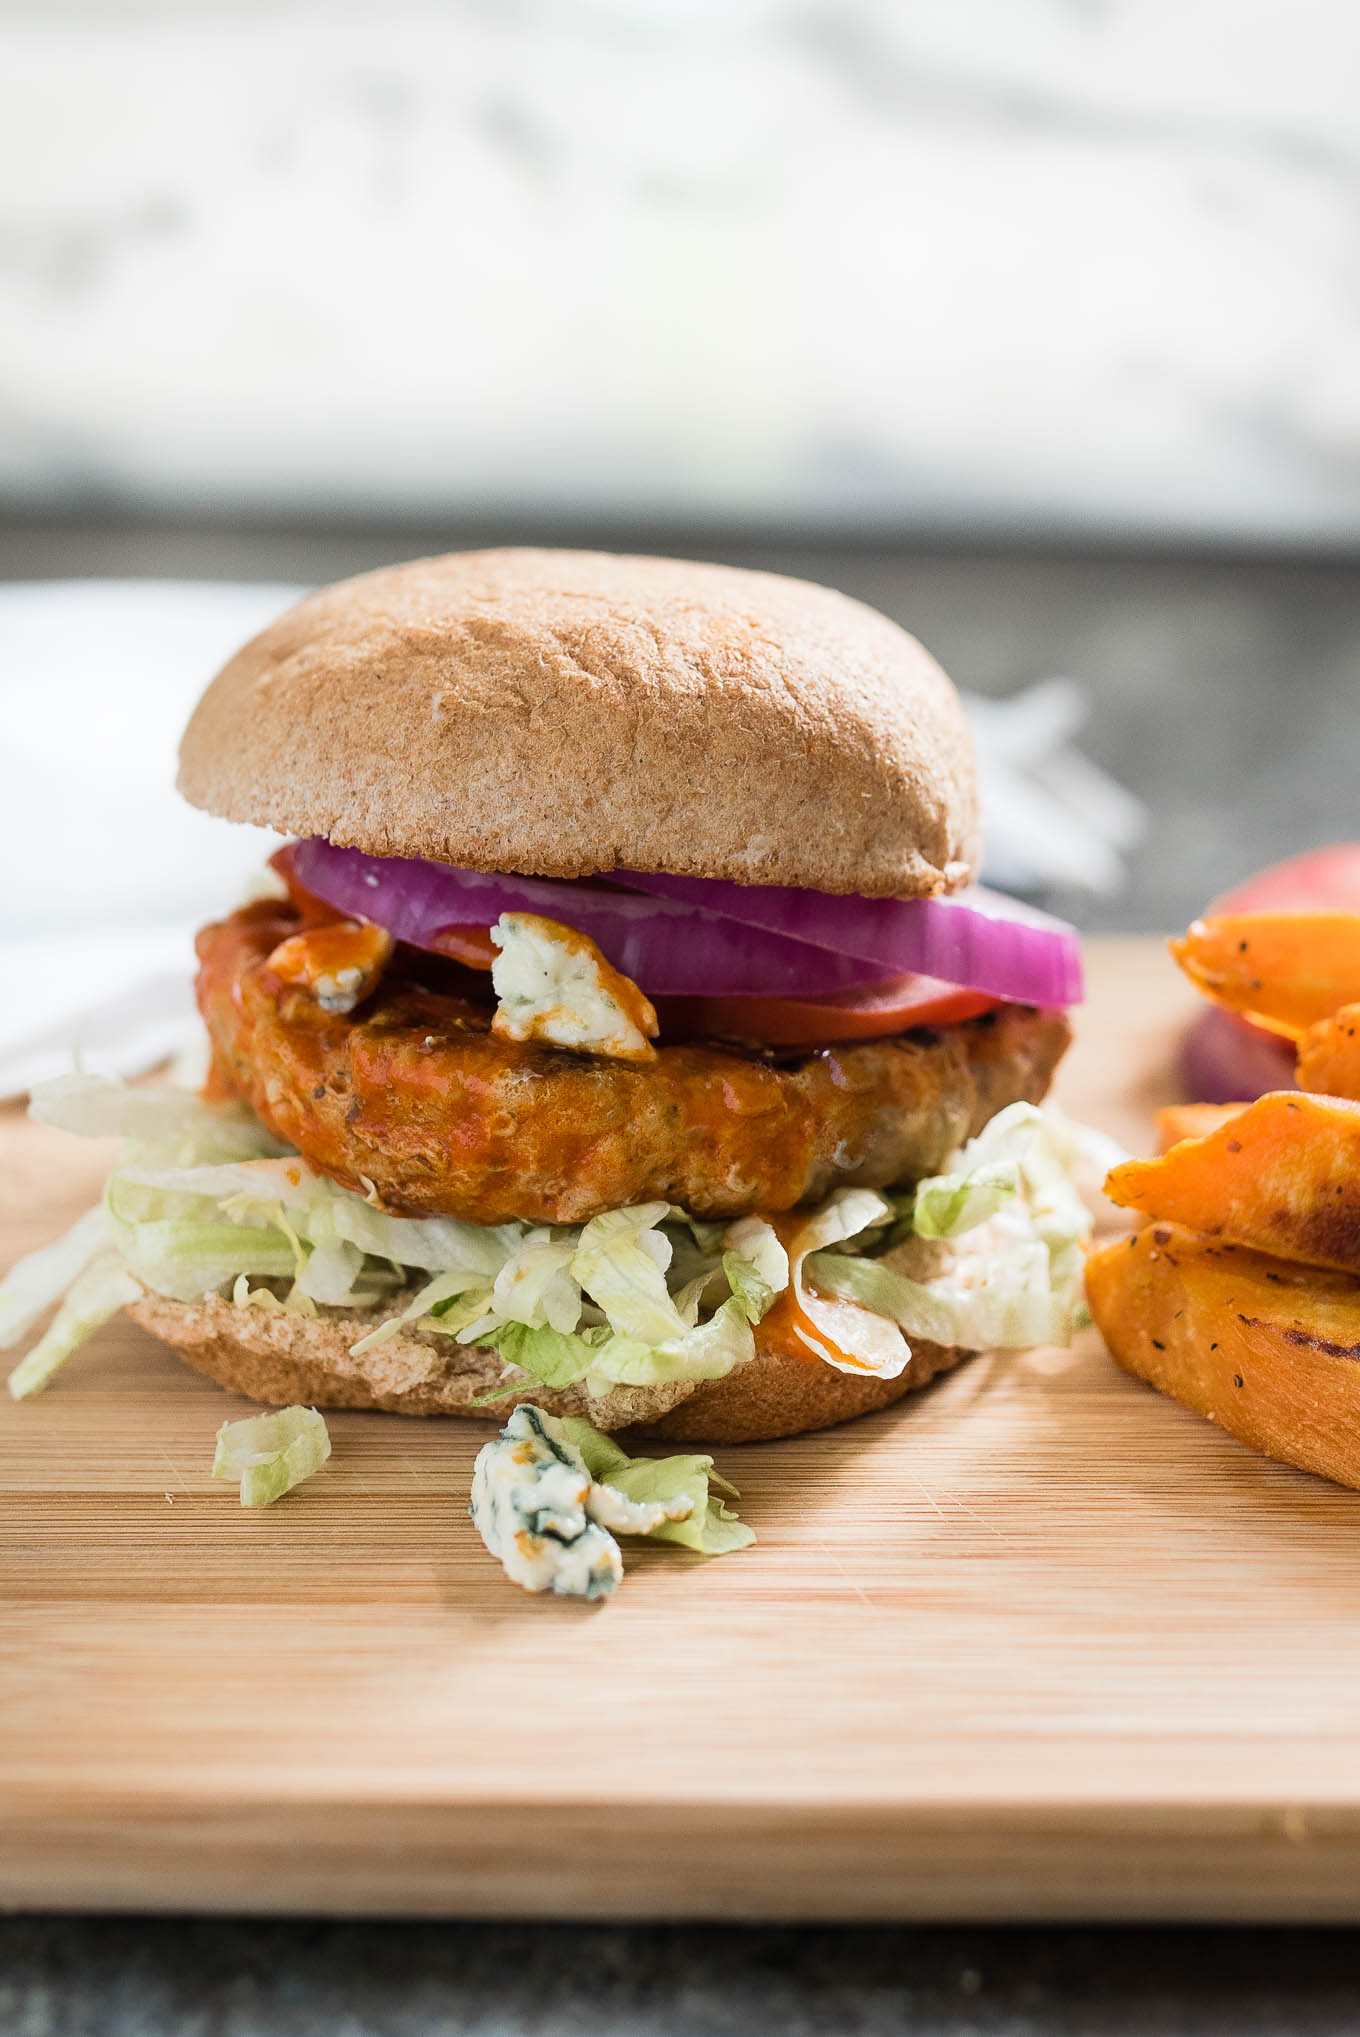 Skip the fried wings and make some easy and tasty Buffalo Turkey Burgers. For a low carb version serve them in lettuce wraps instead of on a bun!